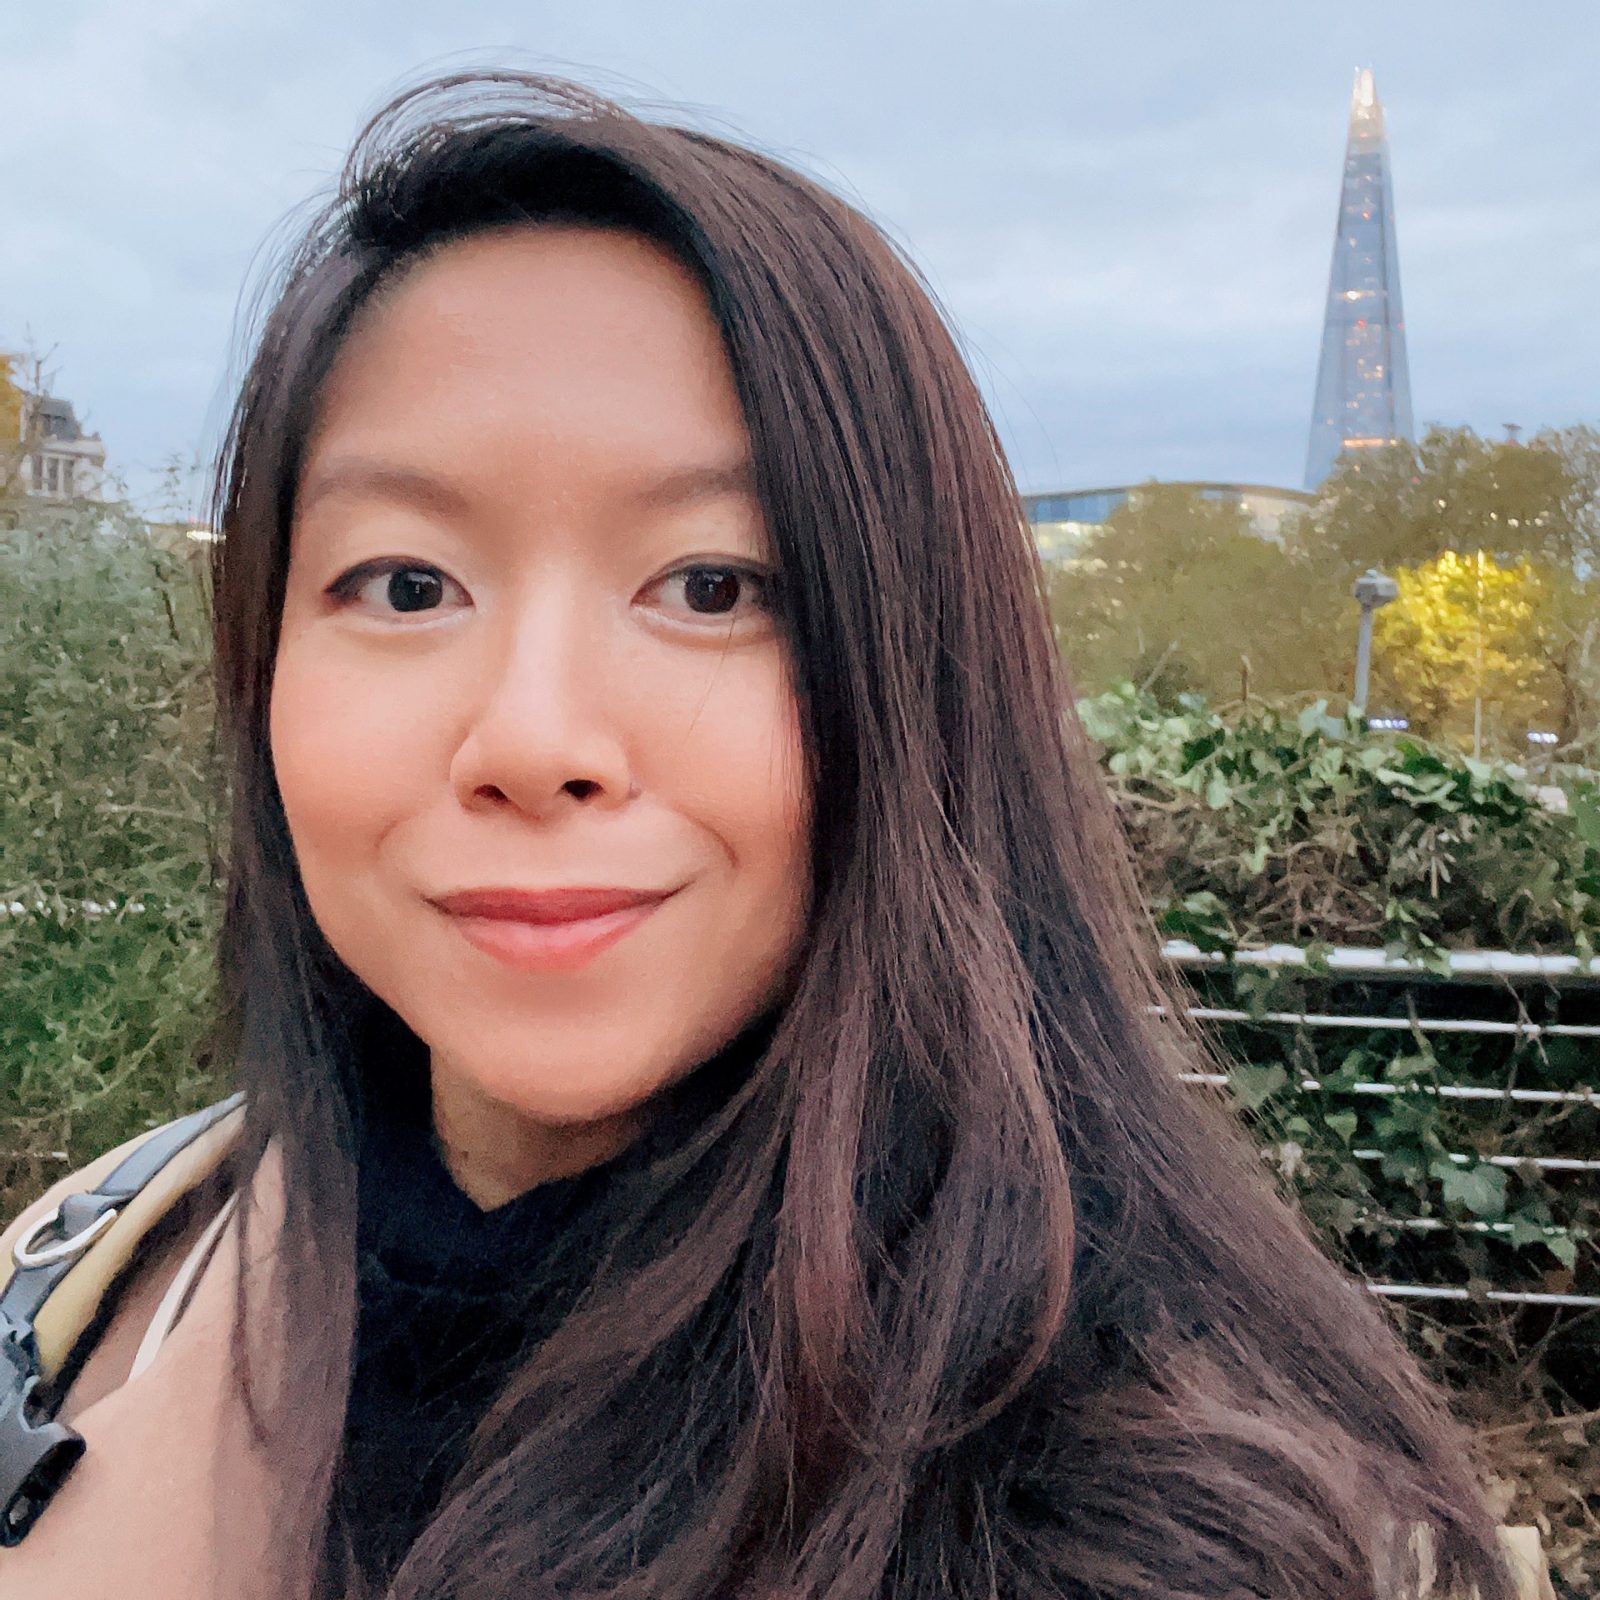 Close-up portrait of Rachel Song taken outside with a city in the distance. She is wearing a light brown jacket and black shirt.